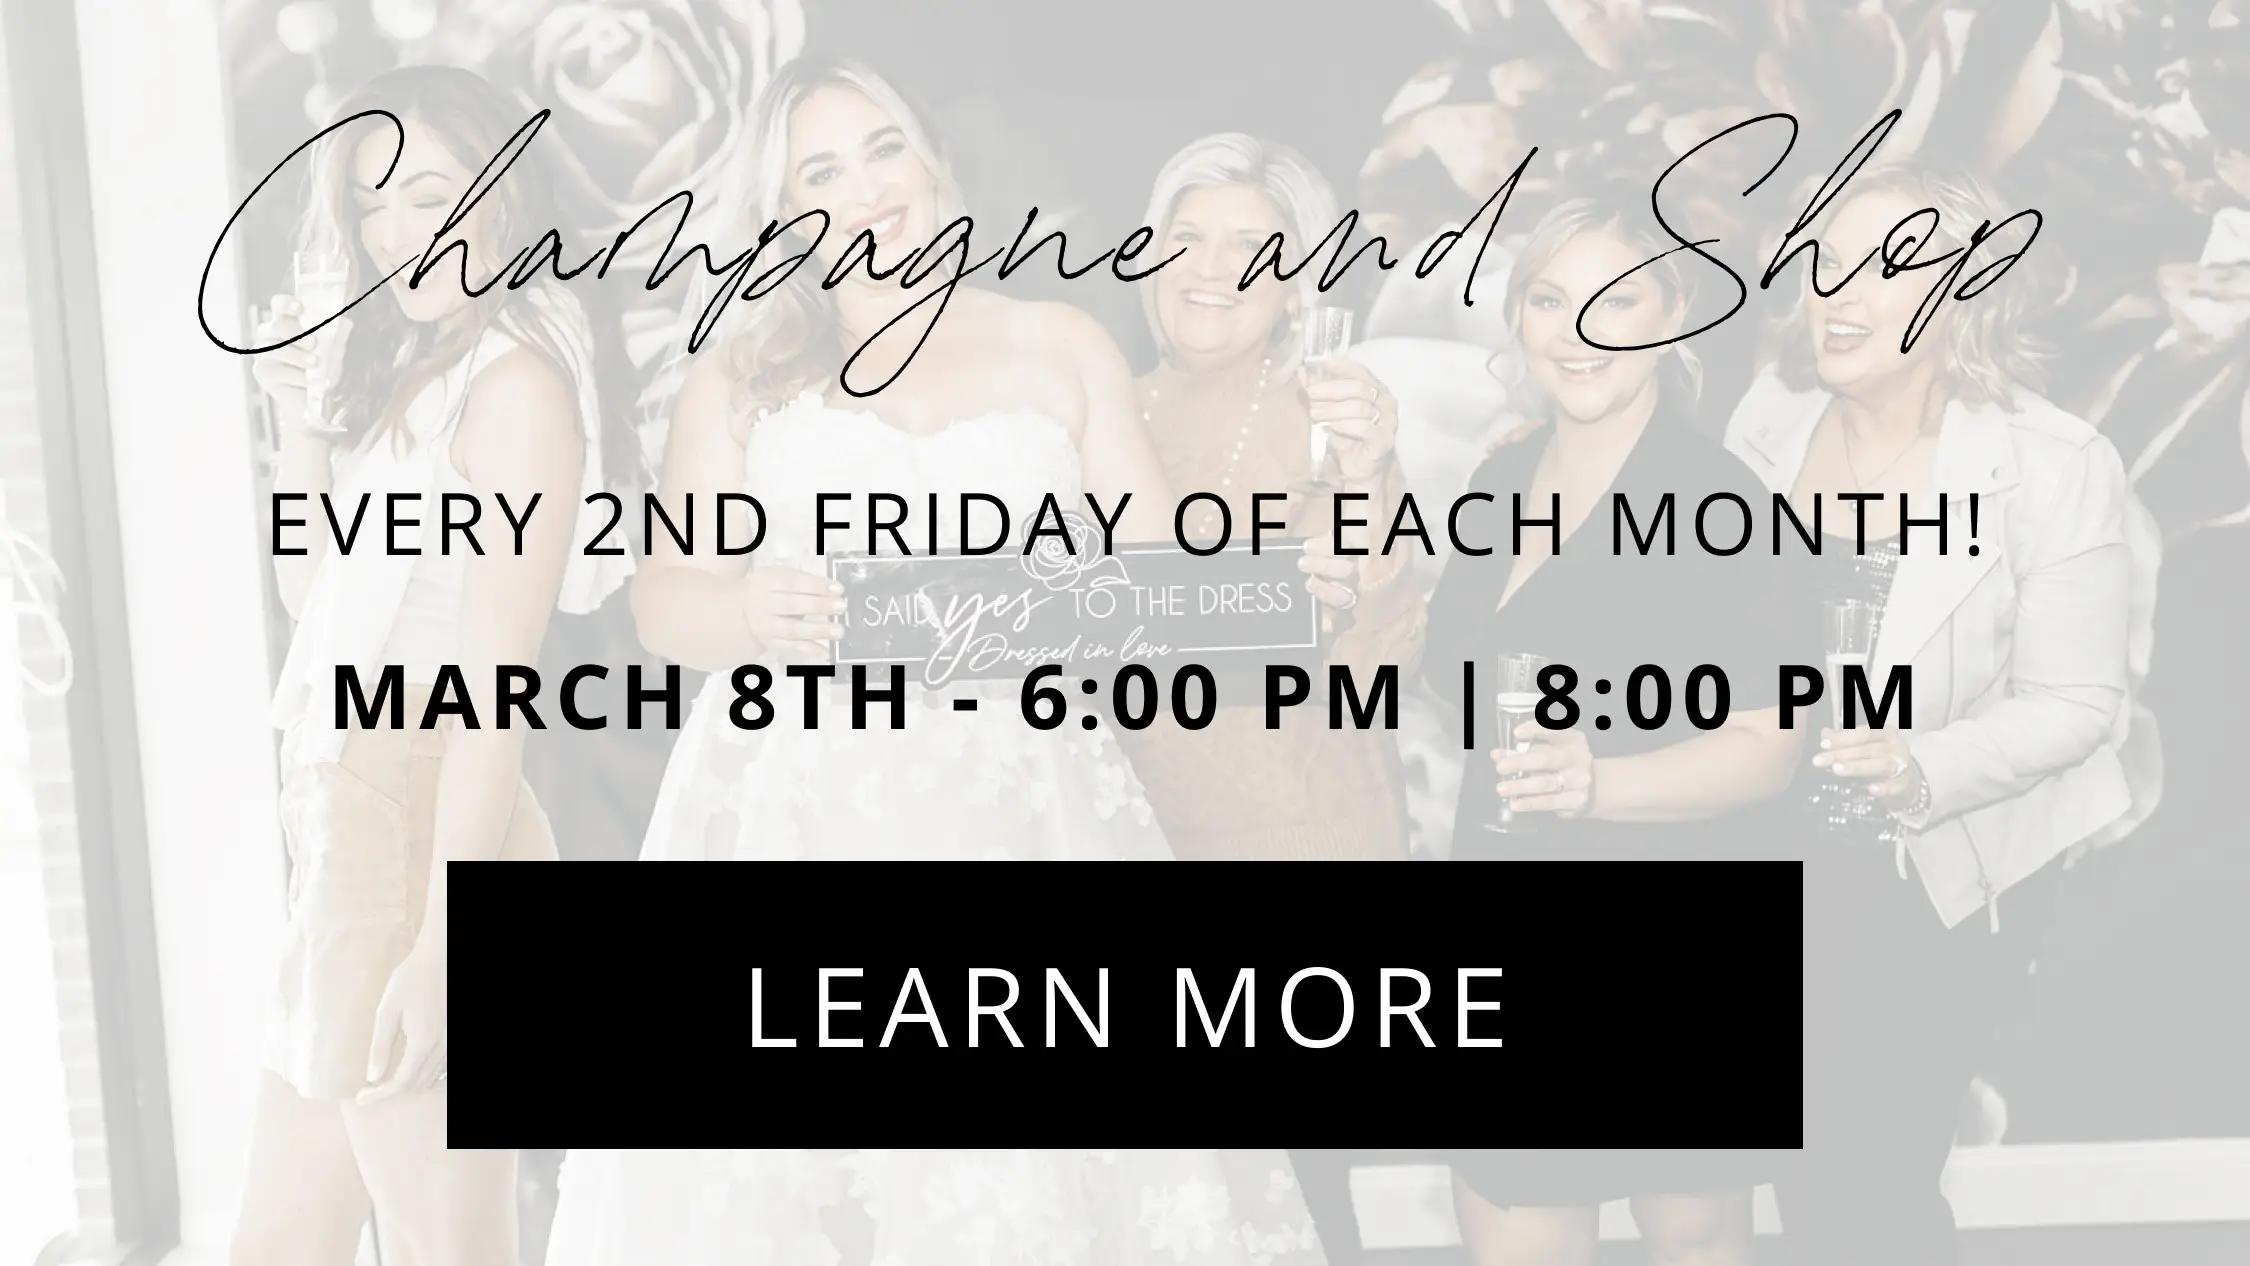 Mobile Champagne & Shop Event Banner